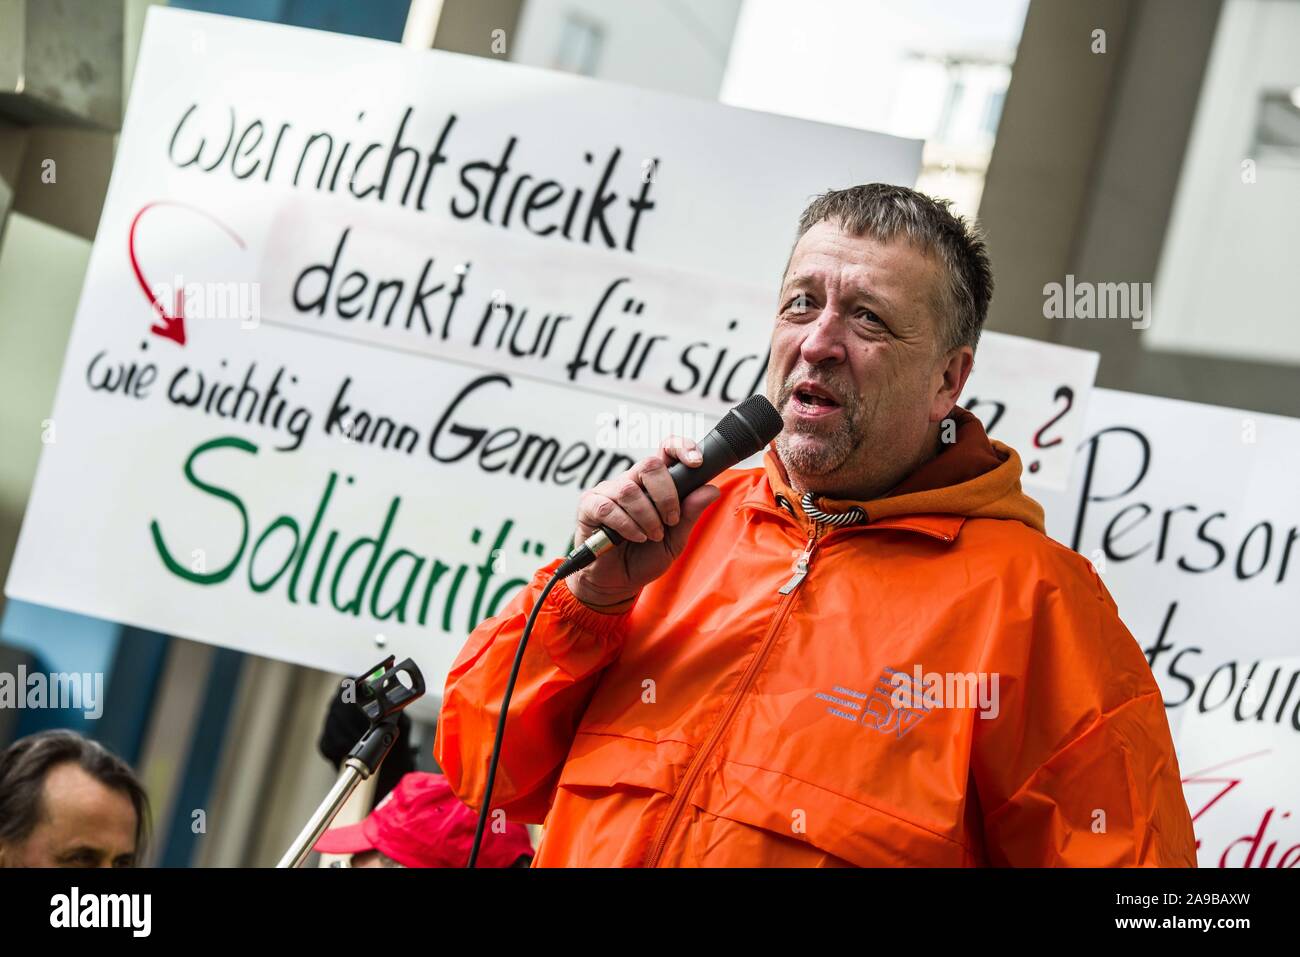 Munich, Bavaria, Germany. 14th Nov, 2019. Michael Busch of the Bavarian Journalist Union (BJV). Demanding a raise of 7, 8% over 33 months, along with increases of payments, licenses, and other payouts, the Bavarian Journalist Union (Bayerischer Journalisten Verband) called for another 48-hour strike against the Bayerischer Rundfunk media house in Munich. The strike encompasses journalists, redaction/editorial staff, and those in related roles with at least 350 in attendance at the Munich location. Credit: ZUMA Press, Inc./Alamy Live News Stock Photo